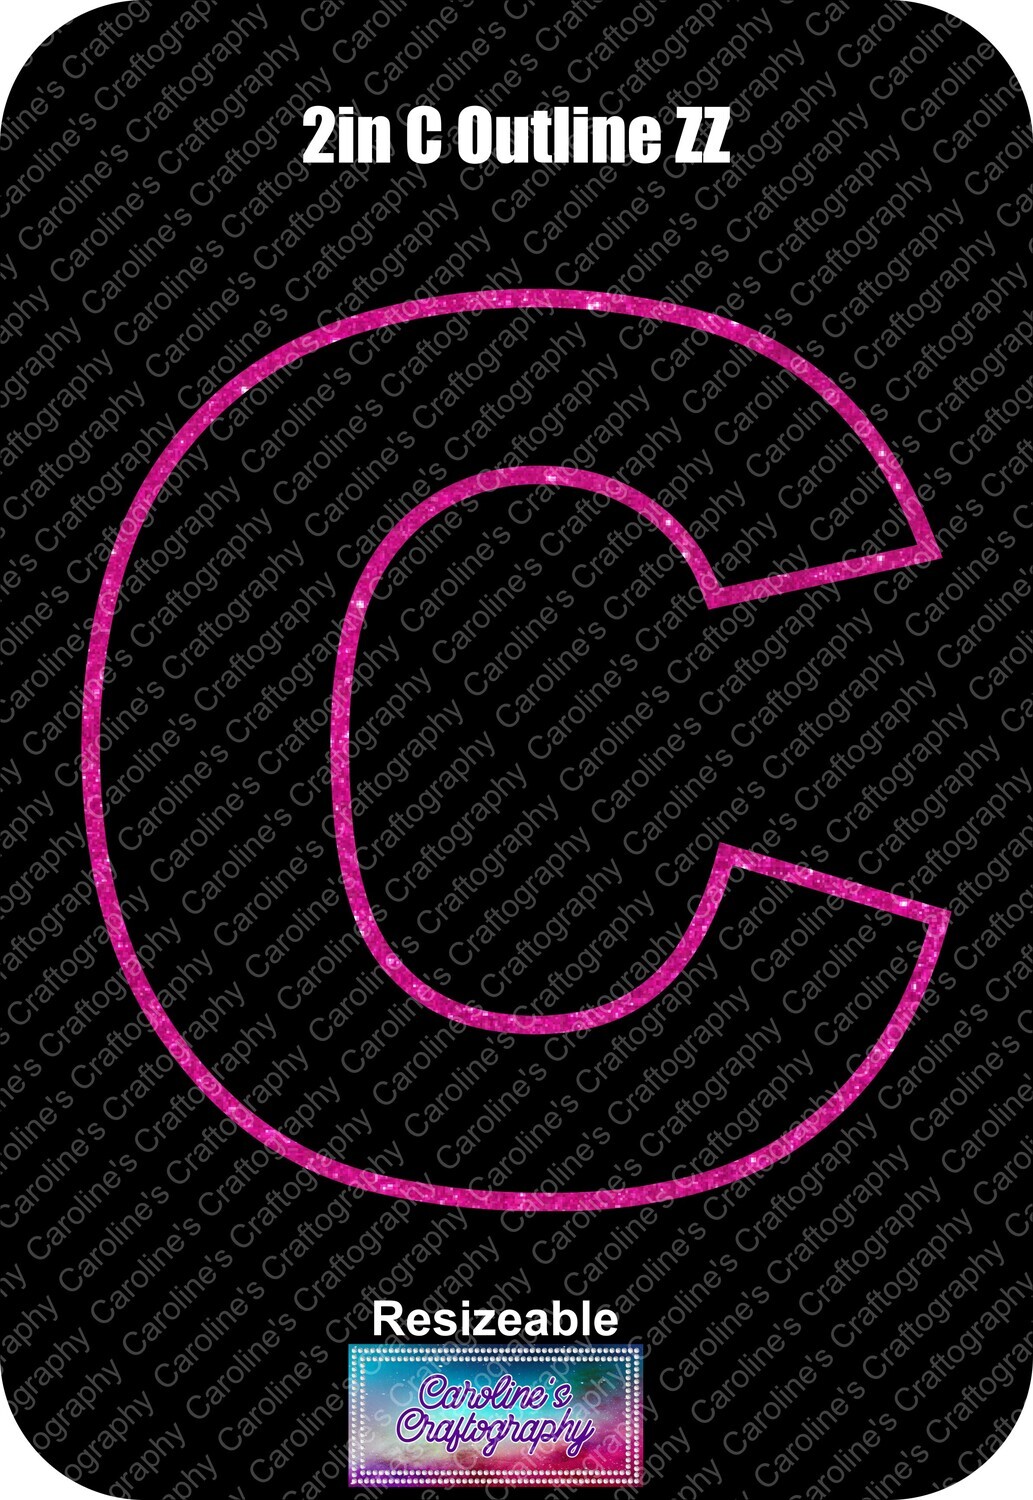 Letter C 2in Acrylic Download